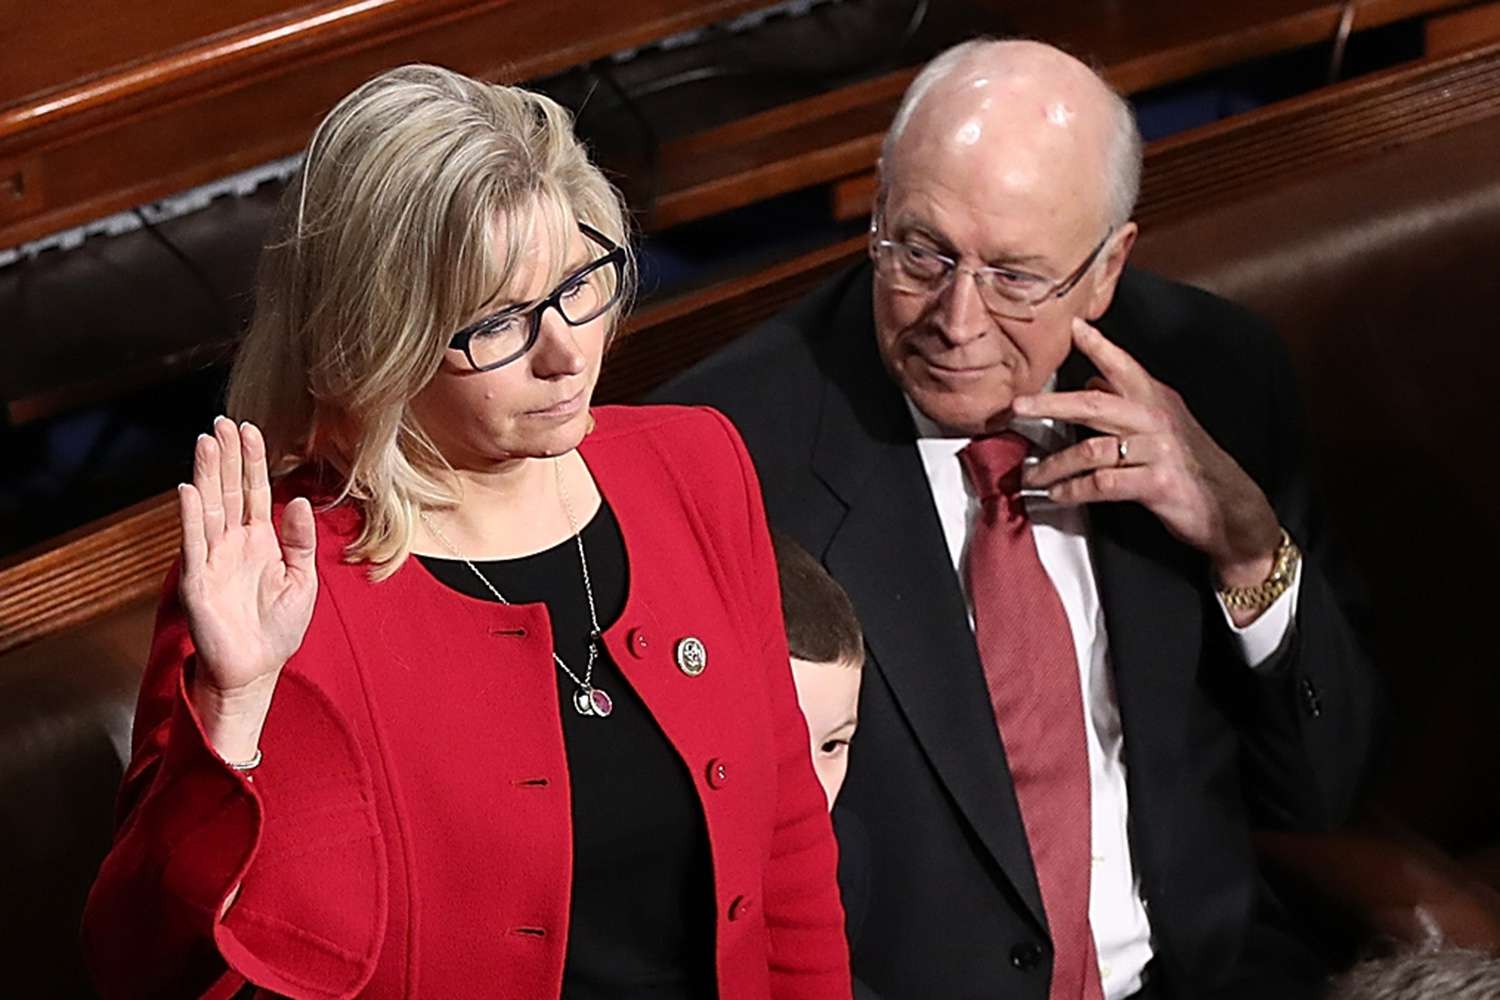 Liz and Dick Cheney Were the Only Republicans to Attend the House's Anniversary Observance of Jan. 6 Riots